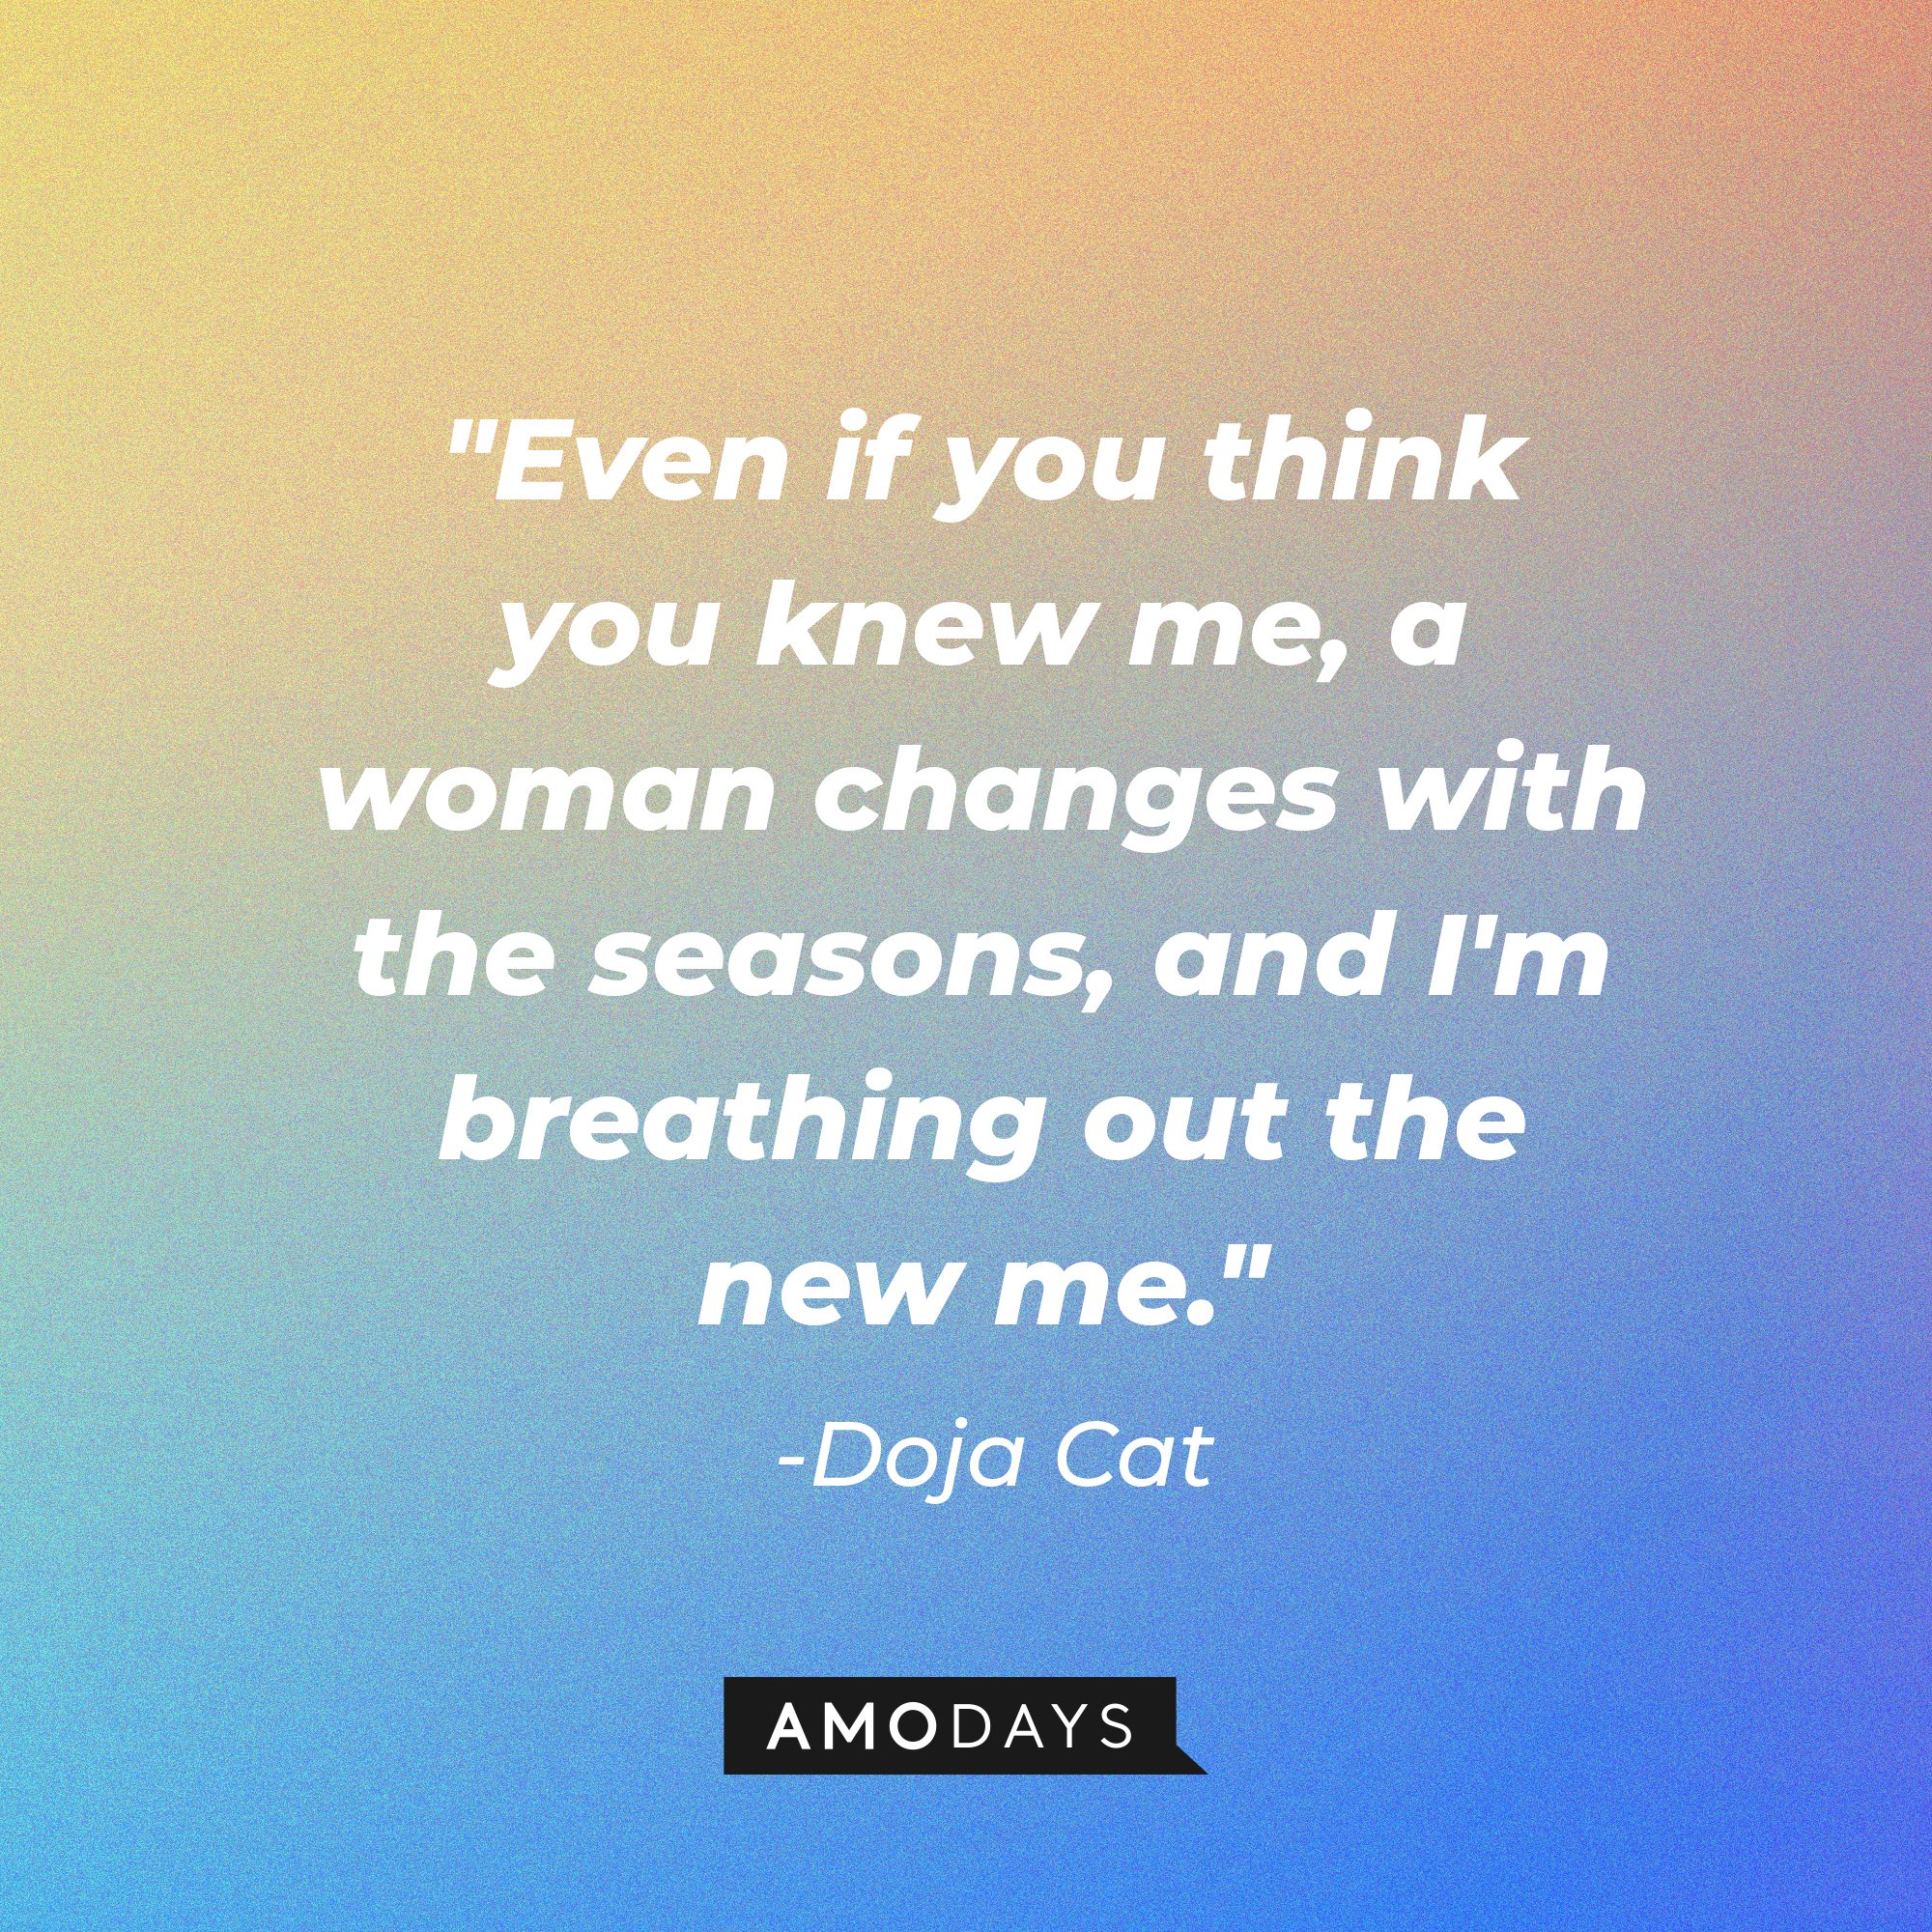 Doja Cat's quote: "Even if you think you knew me, a woman changes with the seasons, and I'm breathing out the new me." | Image: AmoDays